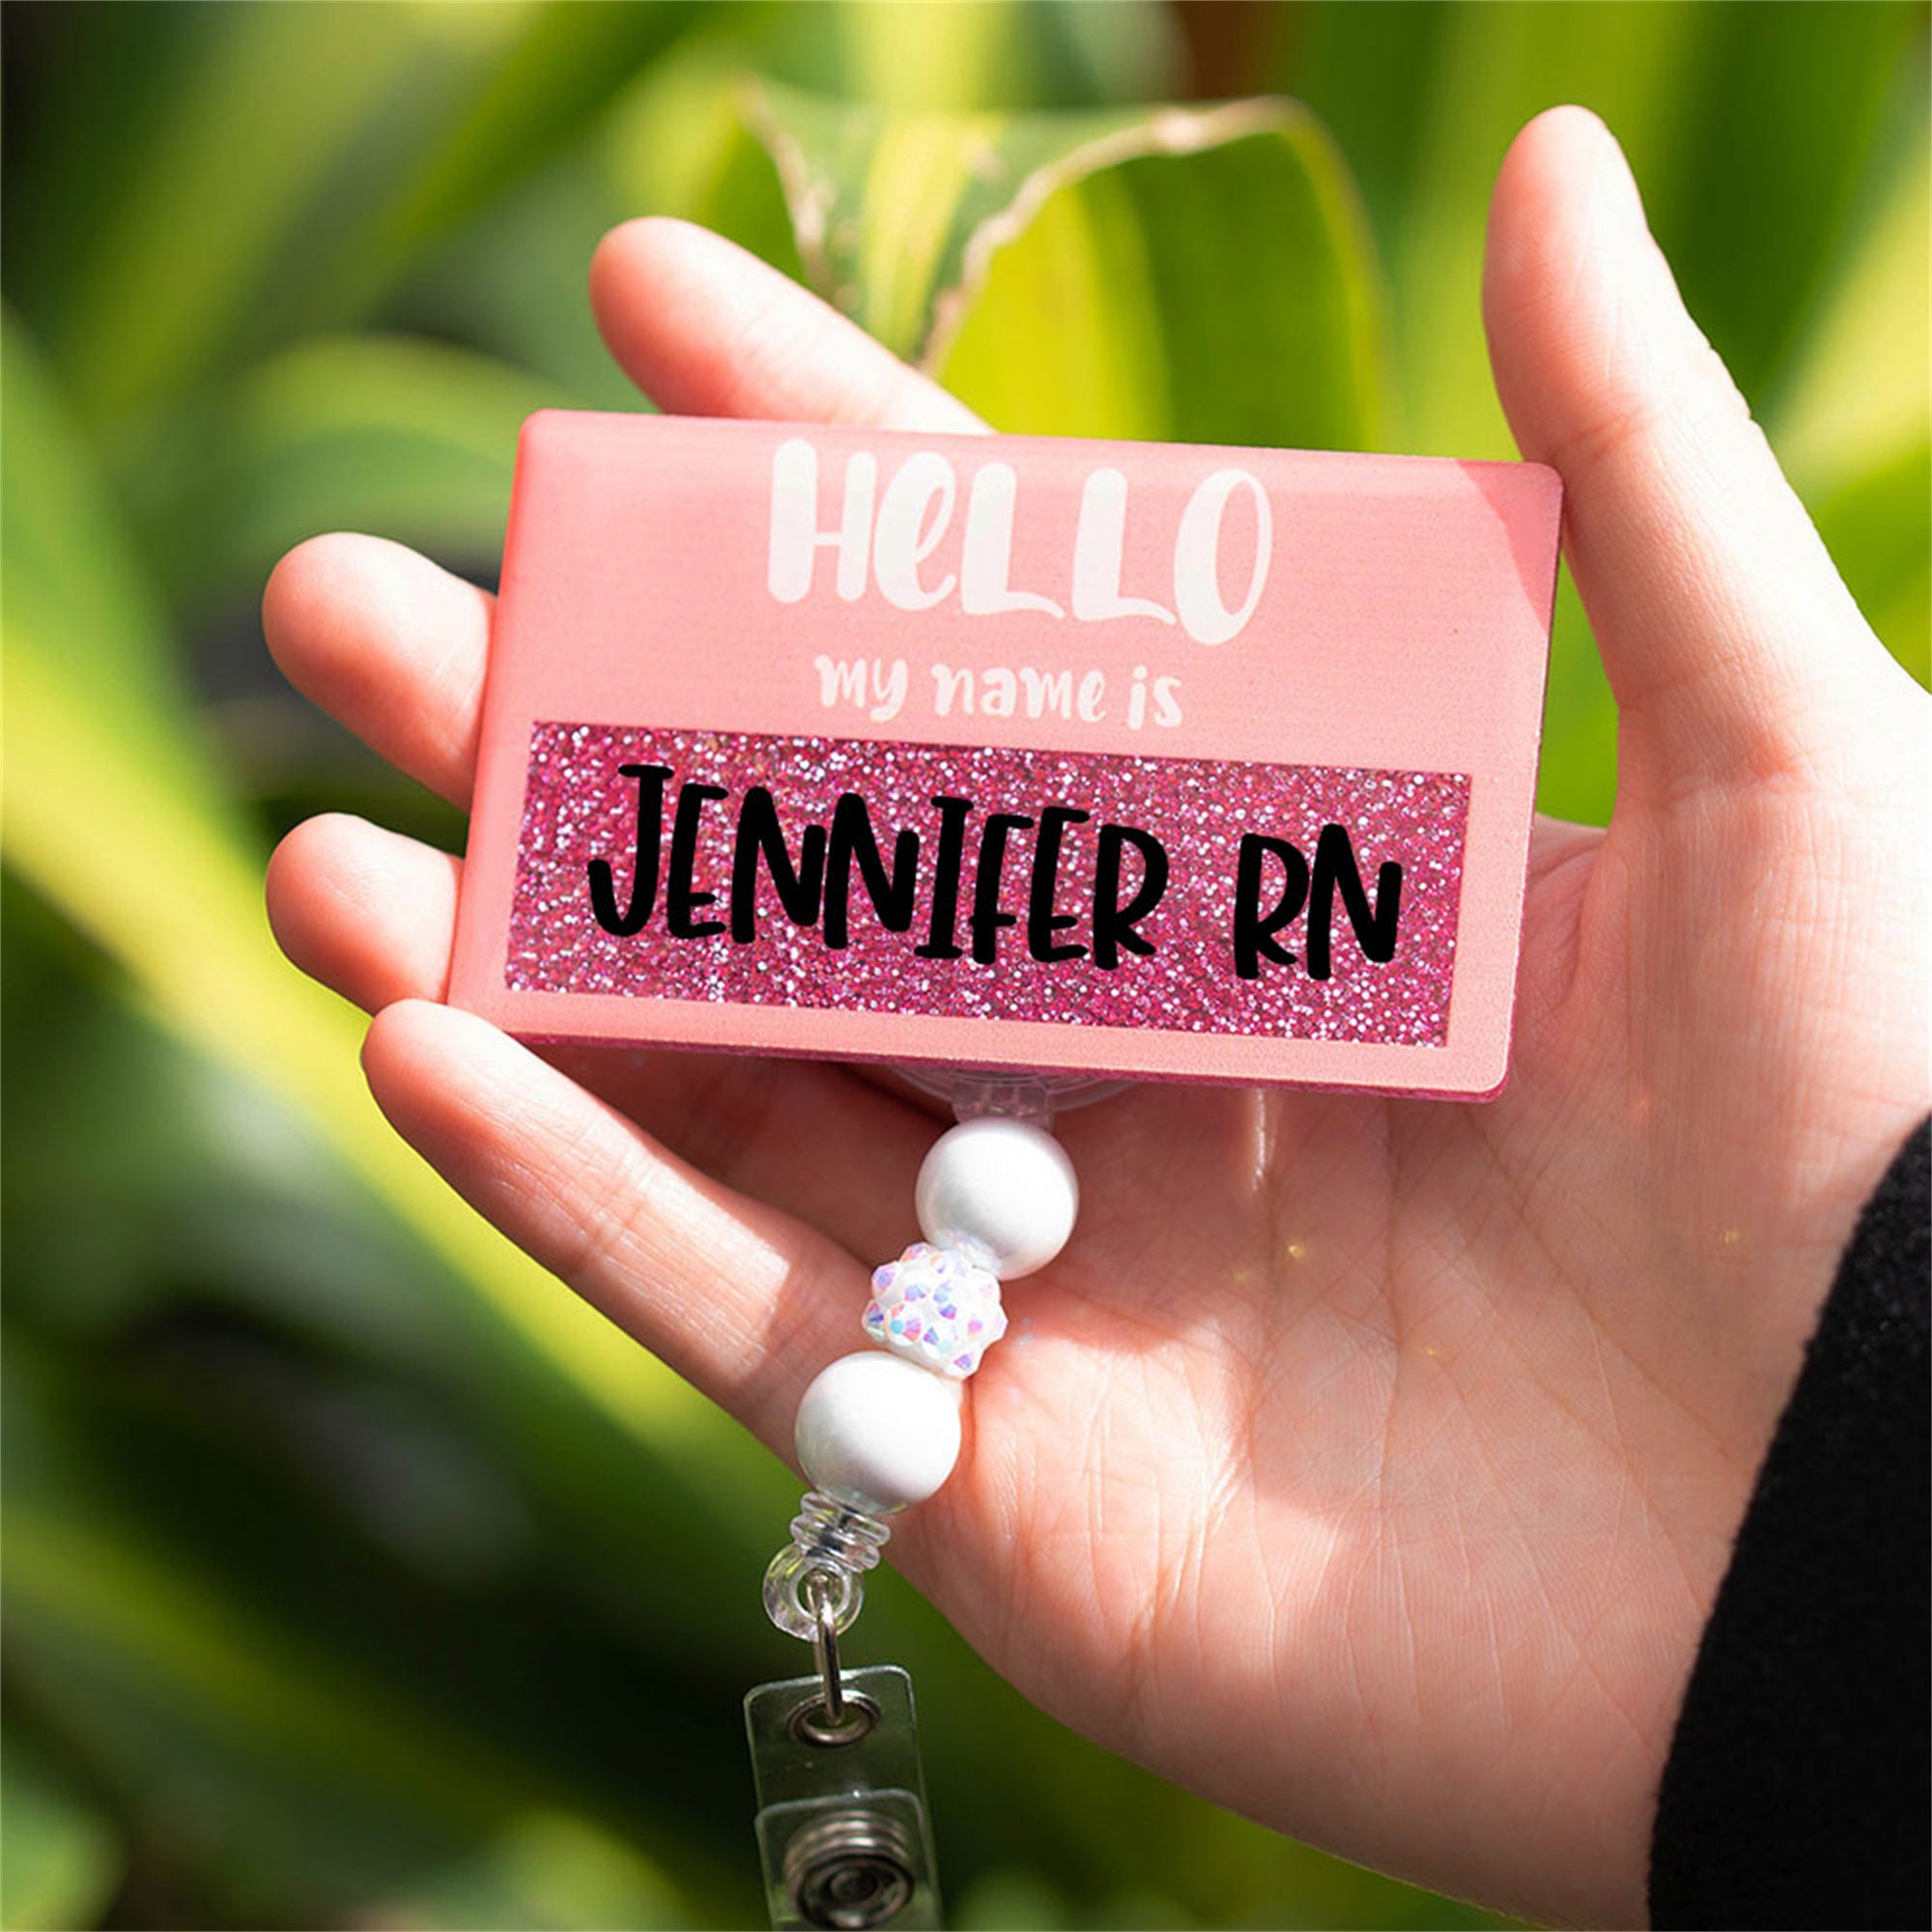 Name Tags INSTANT DOWNLOAD Hello My Name is Name Tag Sticker